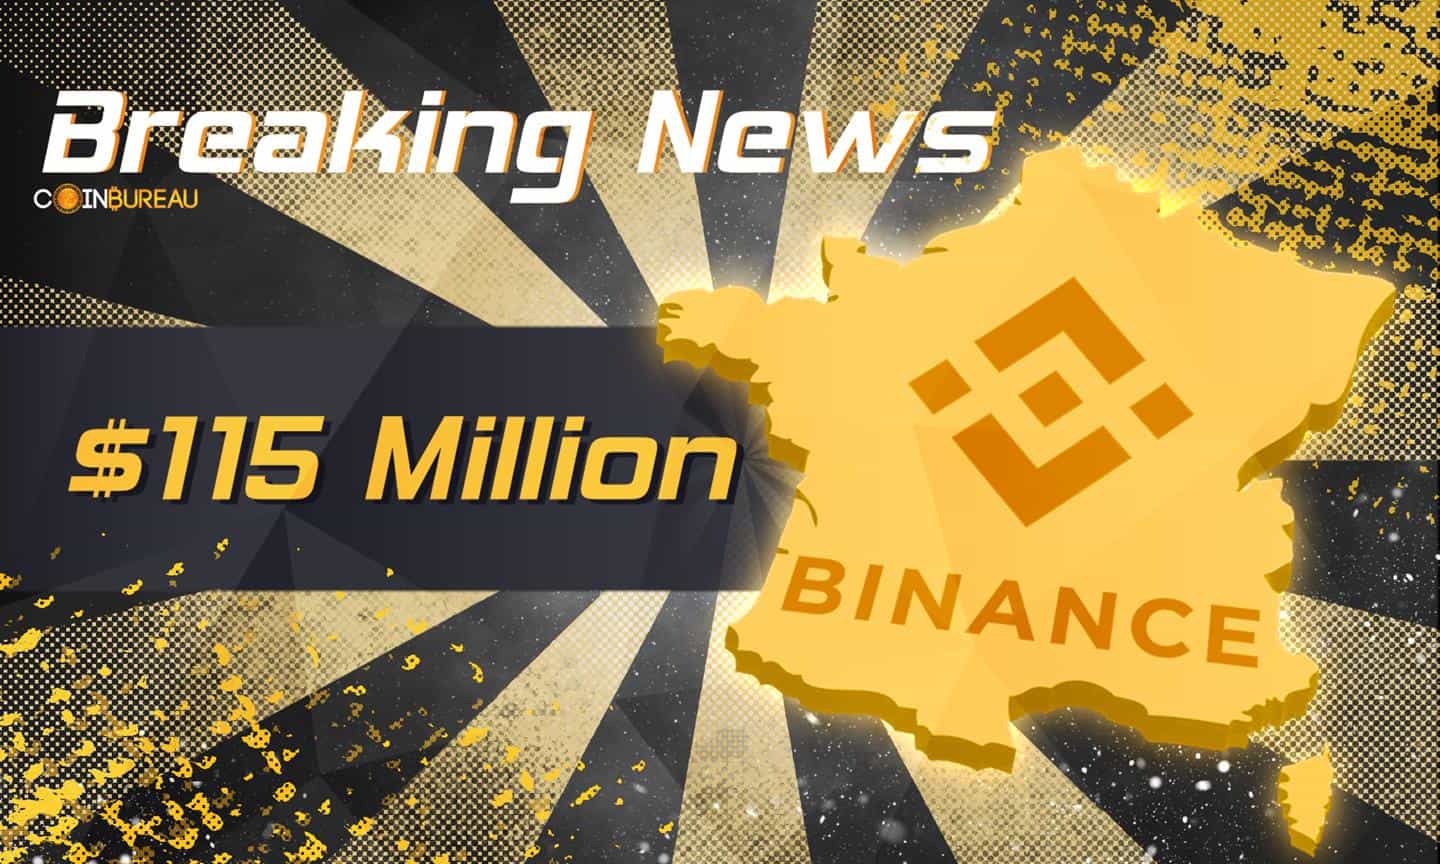 Binance To Drop $115 Million On Building New Crypto Ecosystem in France